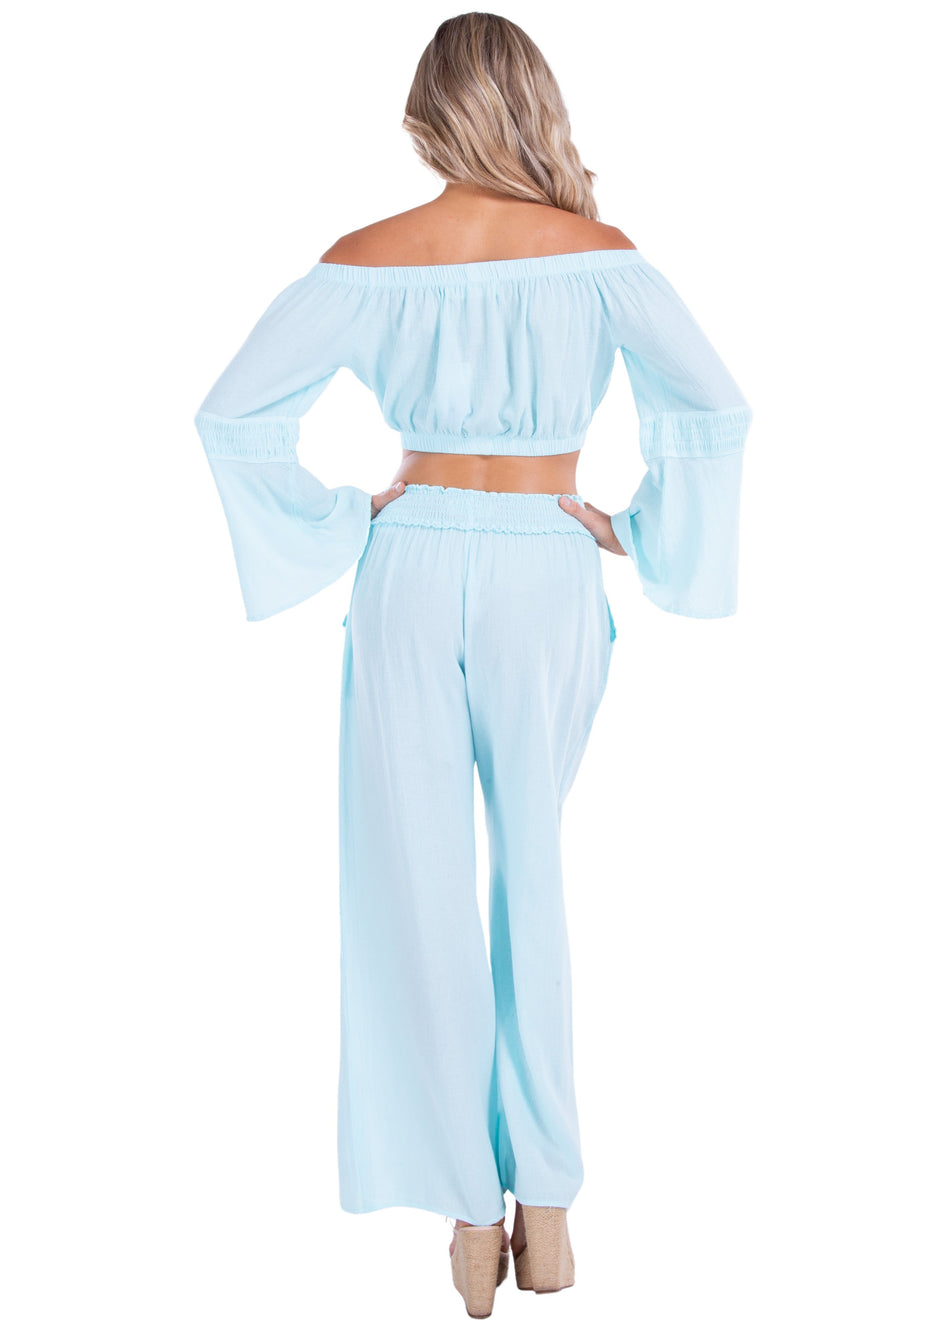 NW1379 - Baby Turquoise Cotton Pants